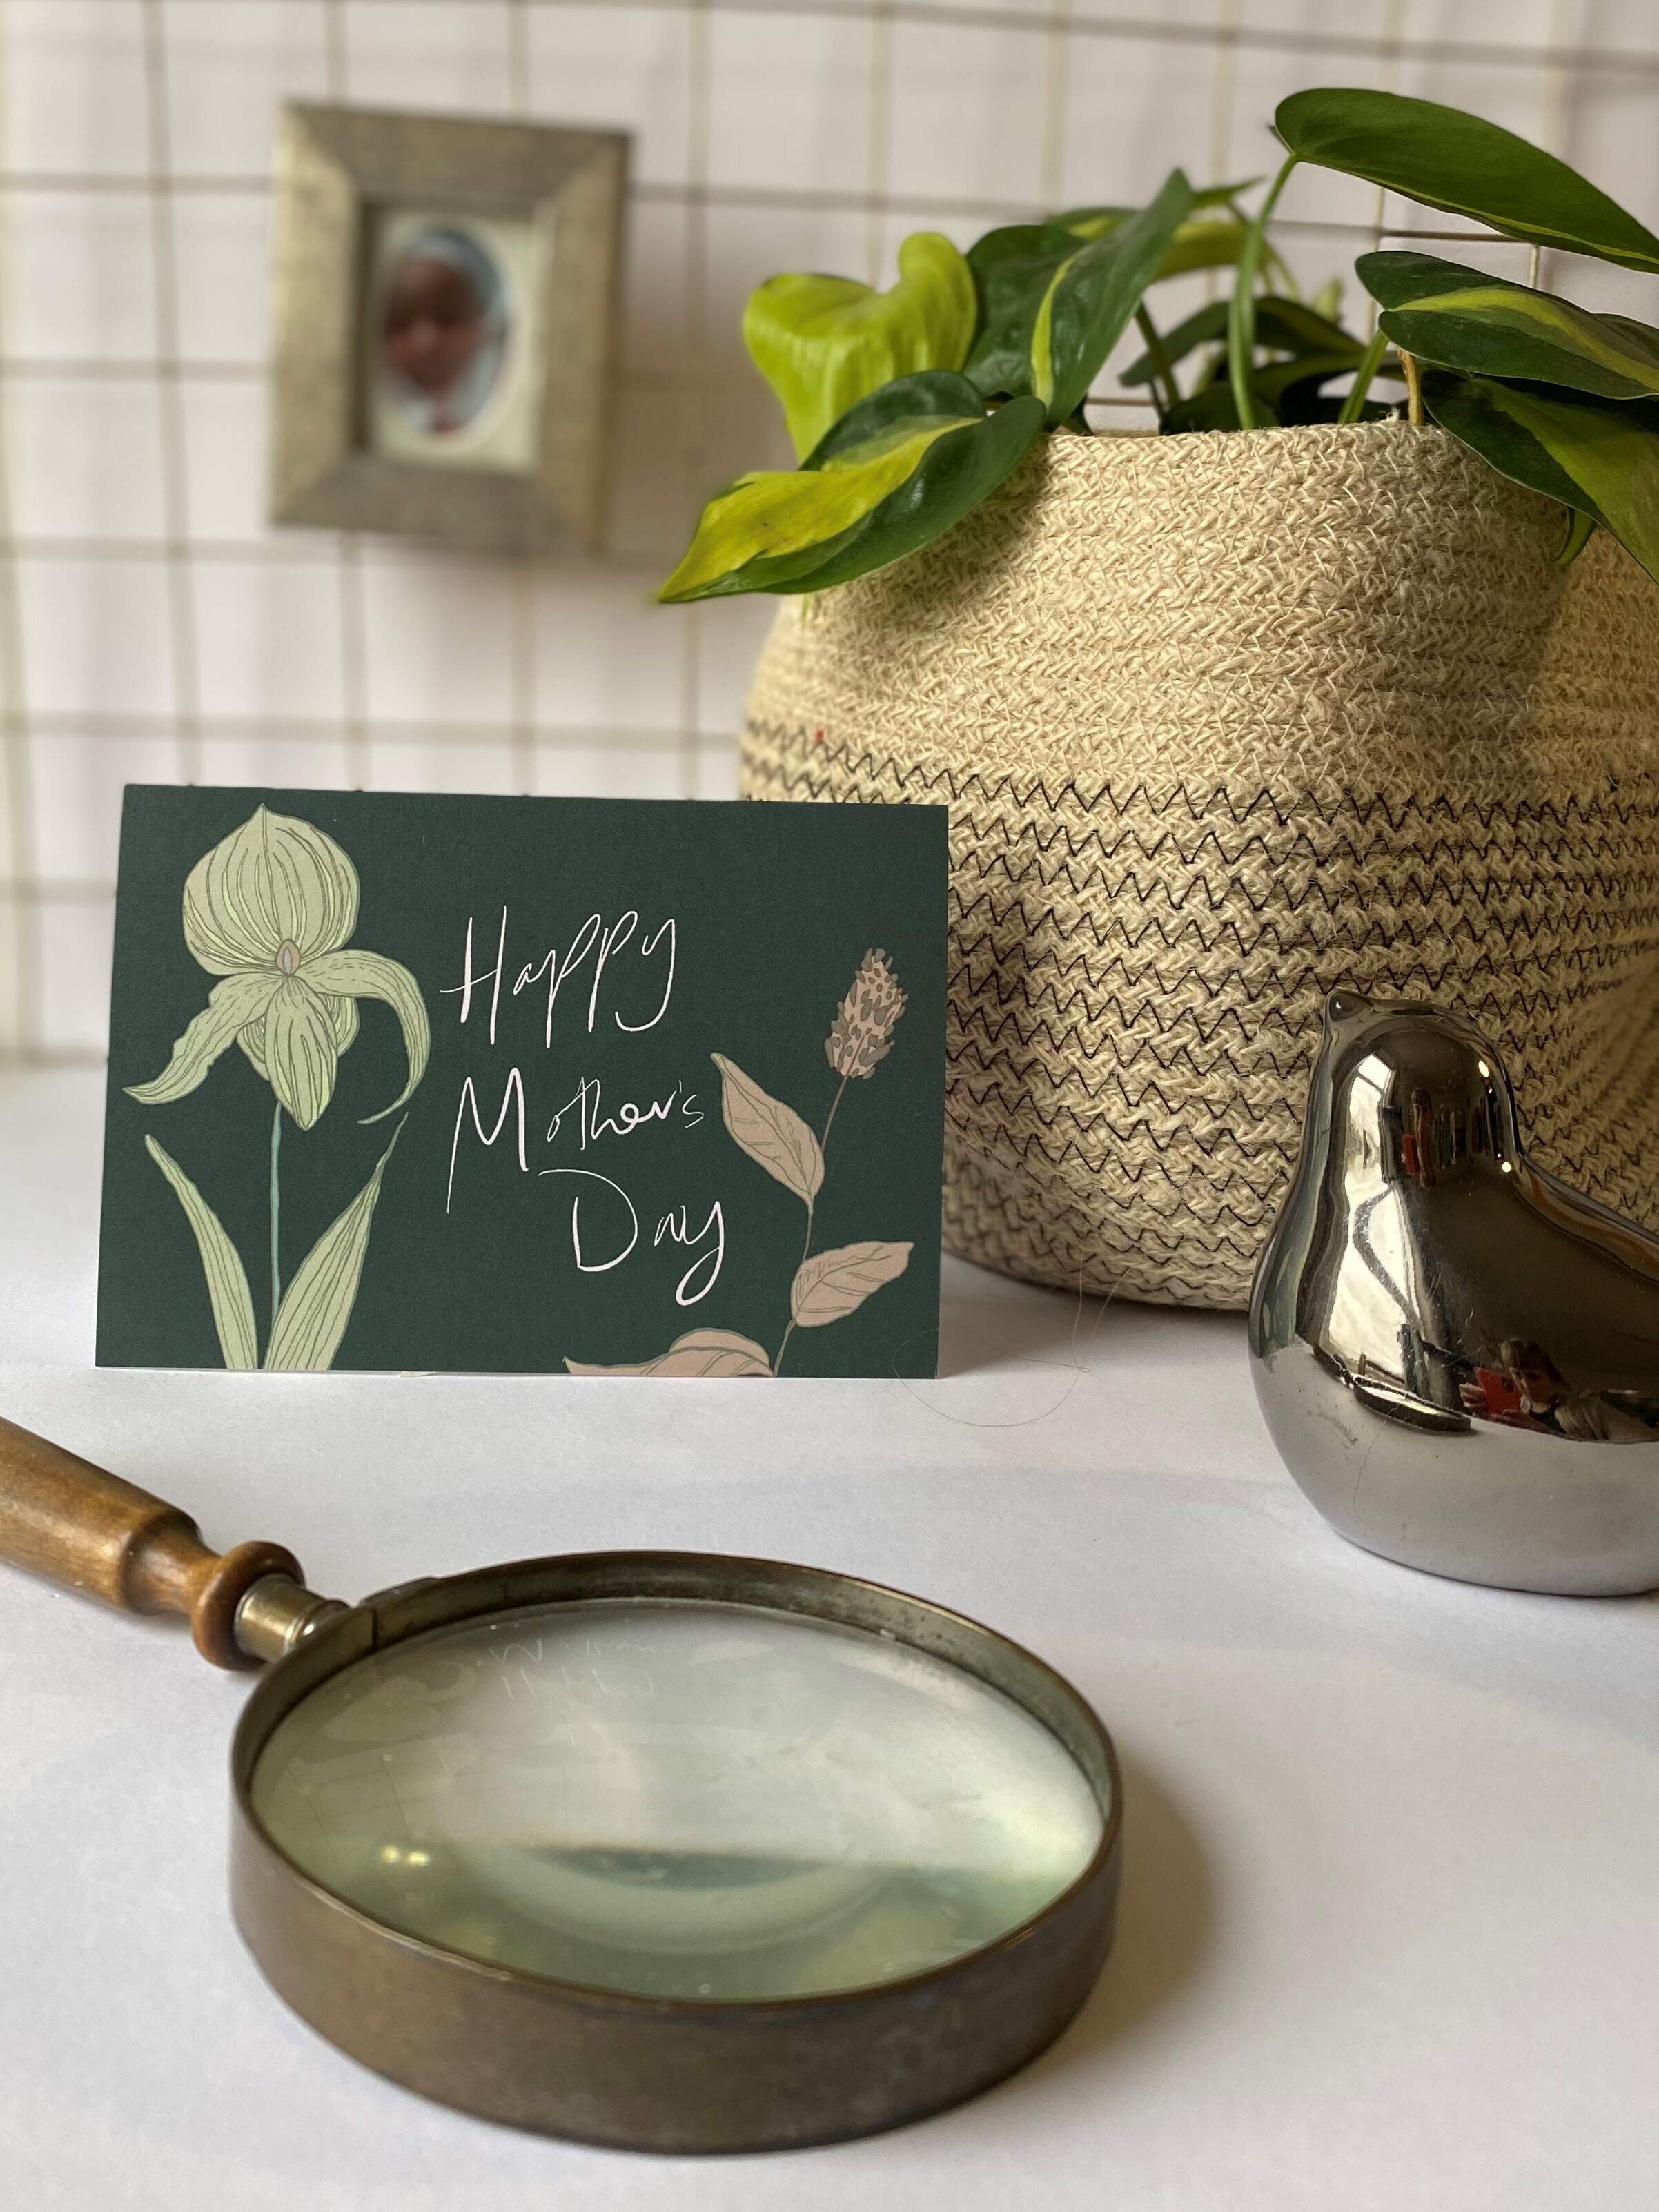 Happy Mother's Day greetings card LMMD002